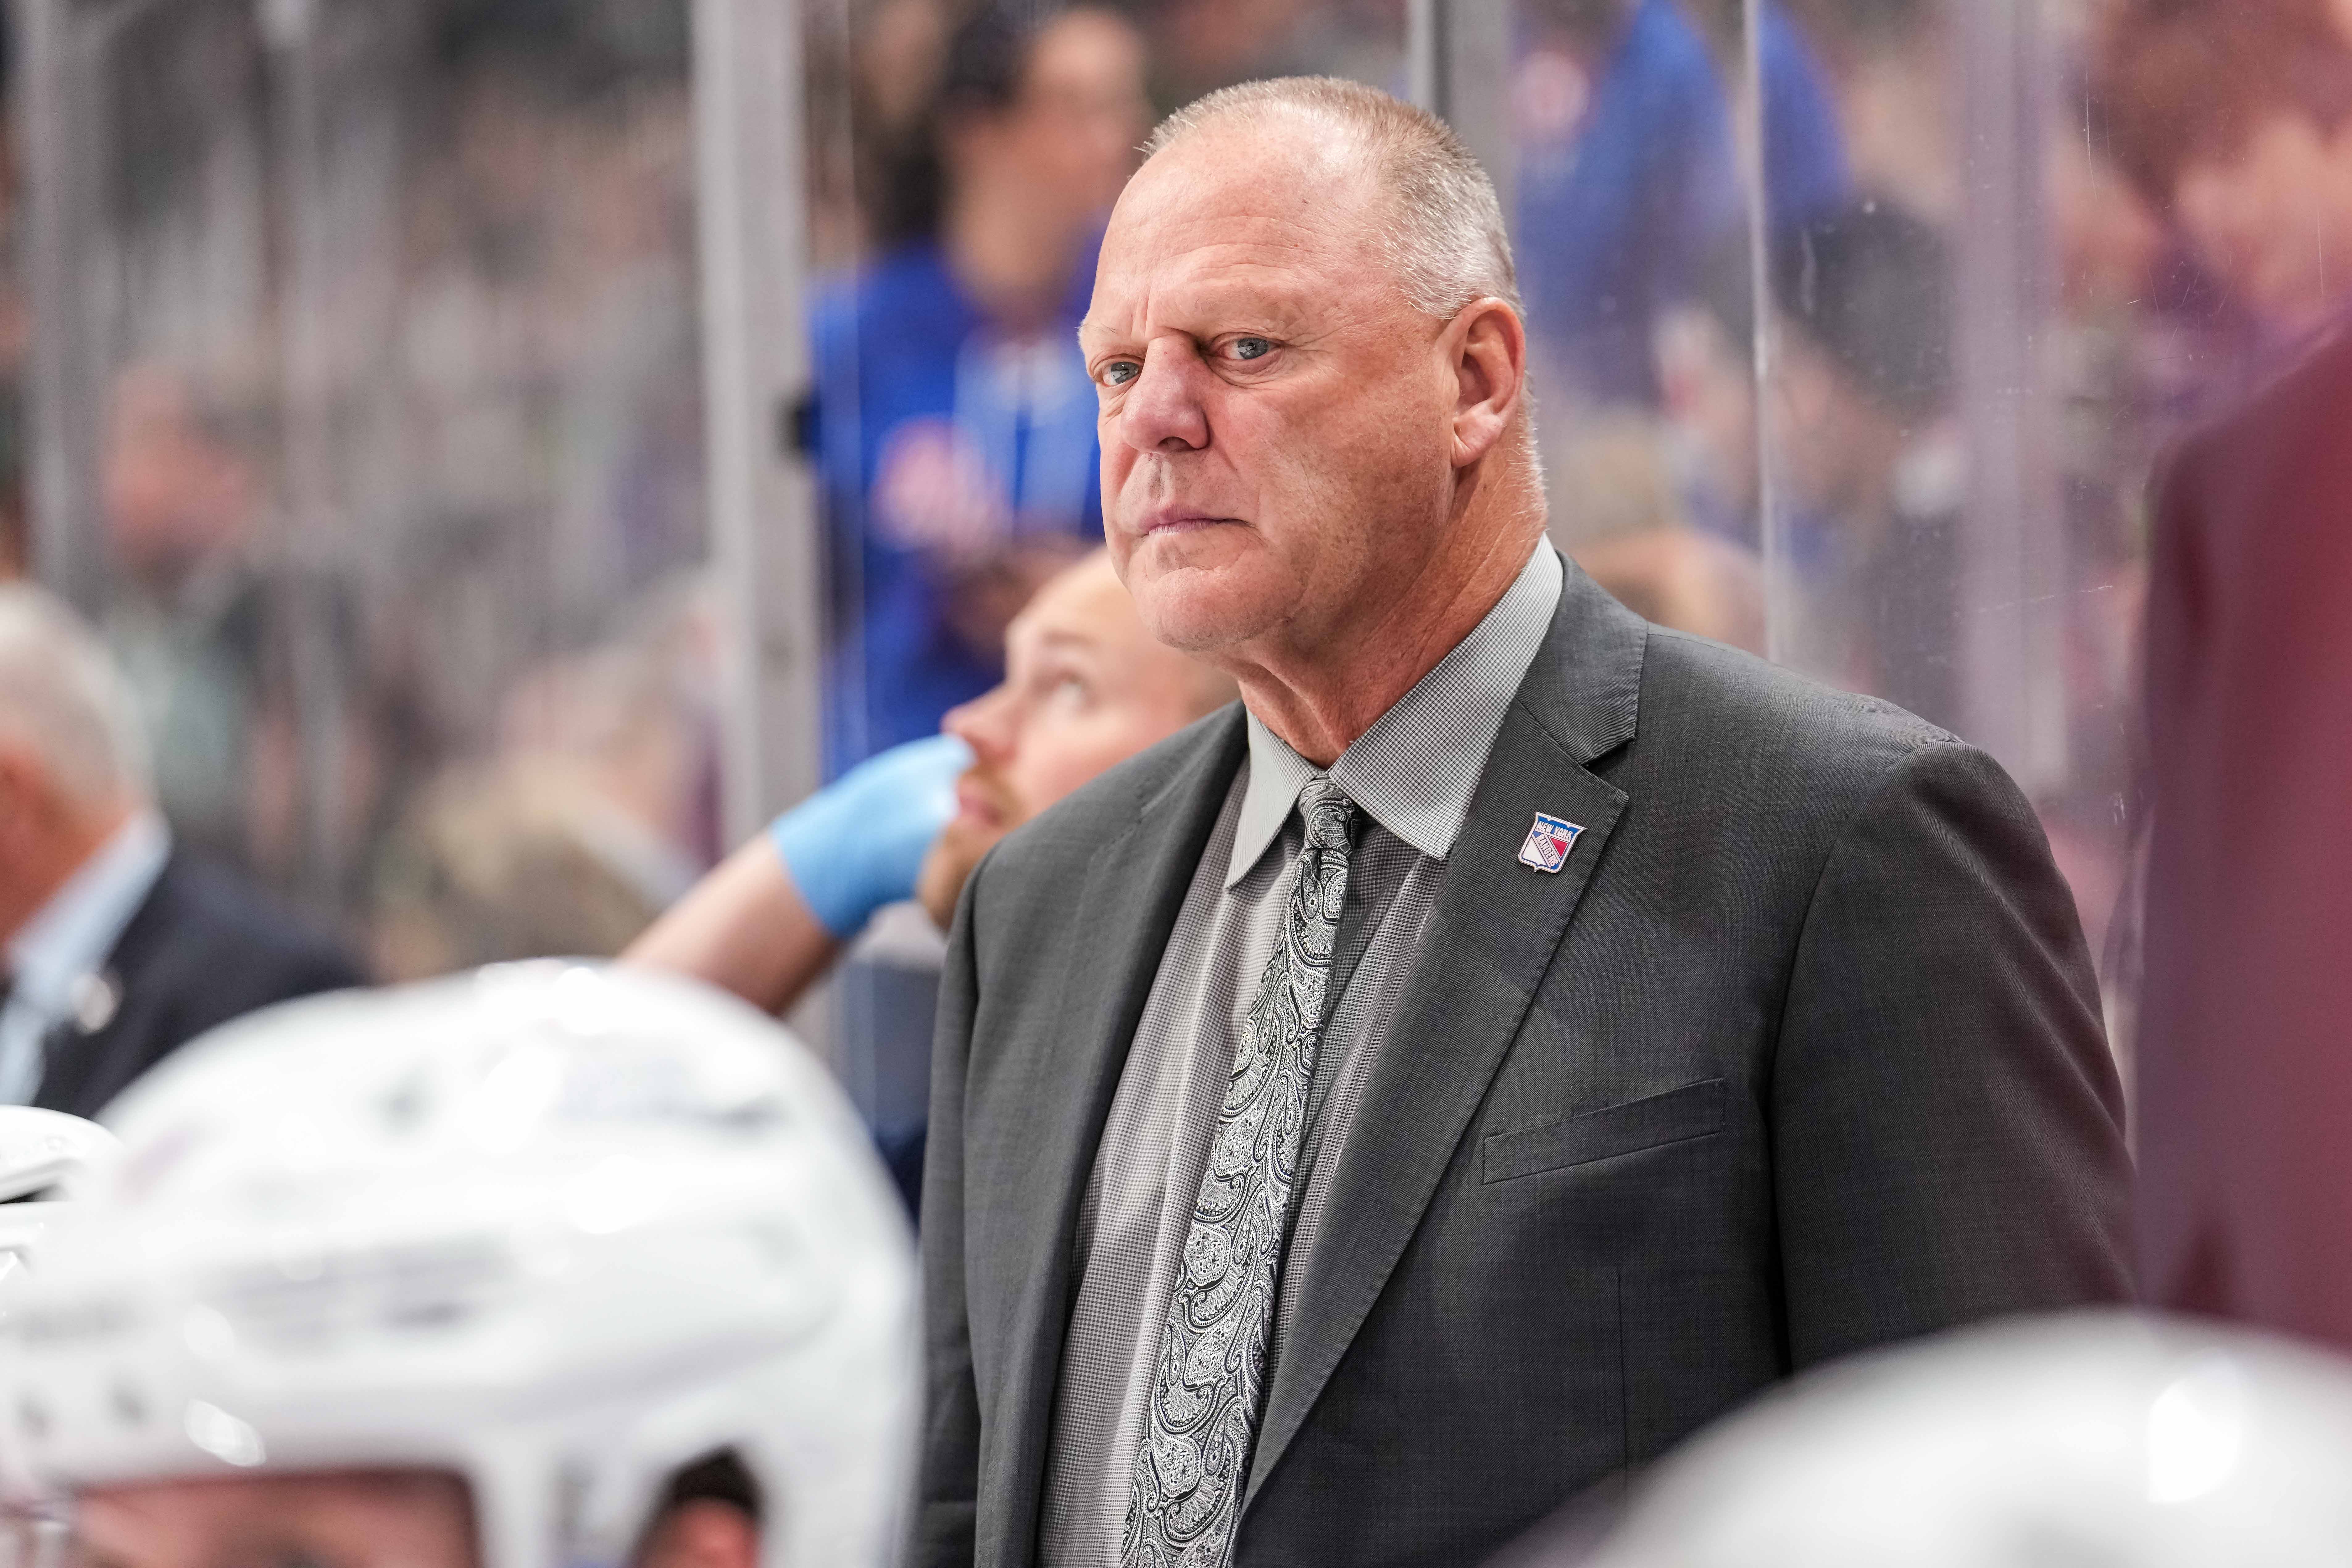 Rangers coach Gerard Gallant is out after two seasons, playoff flop